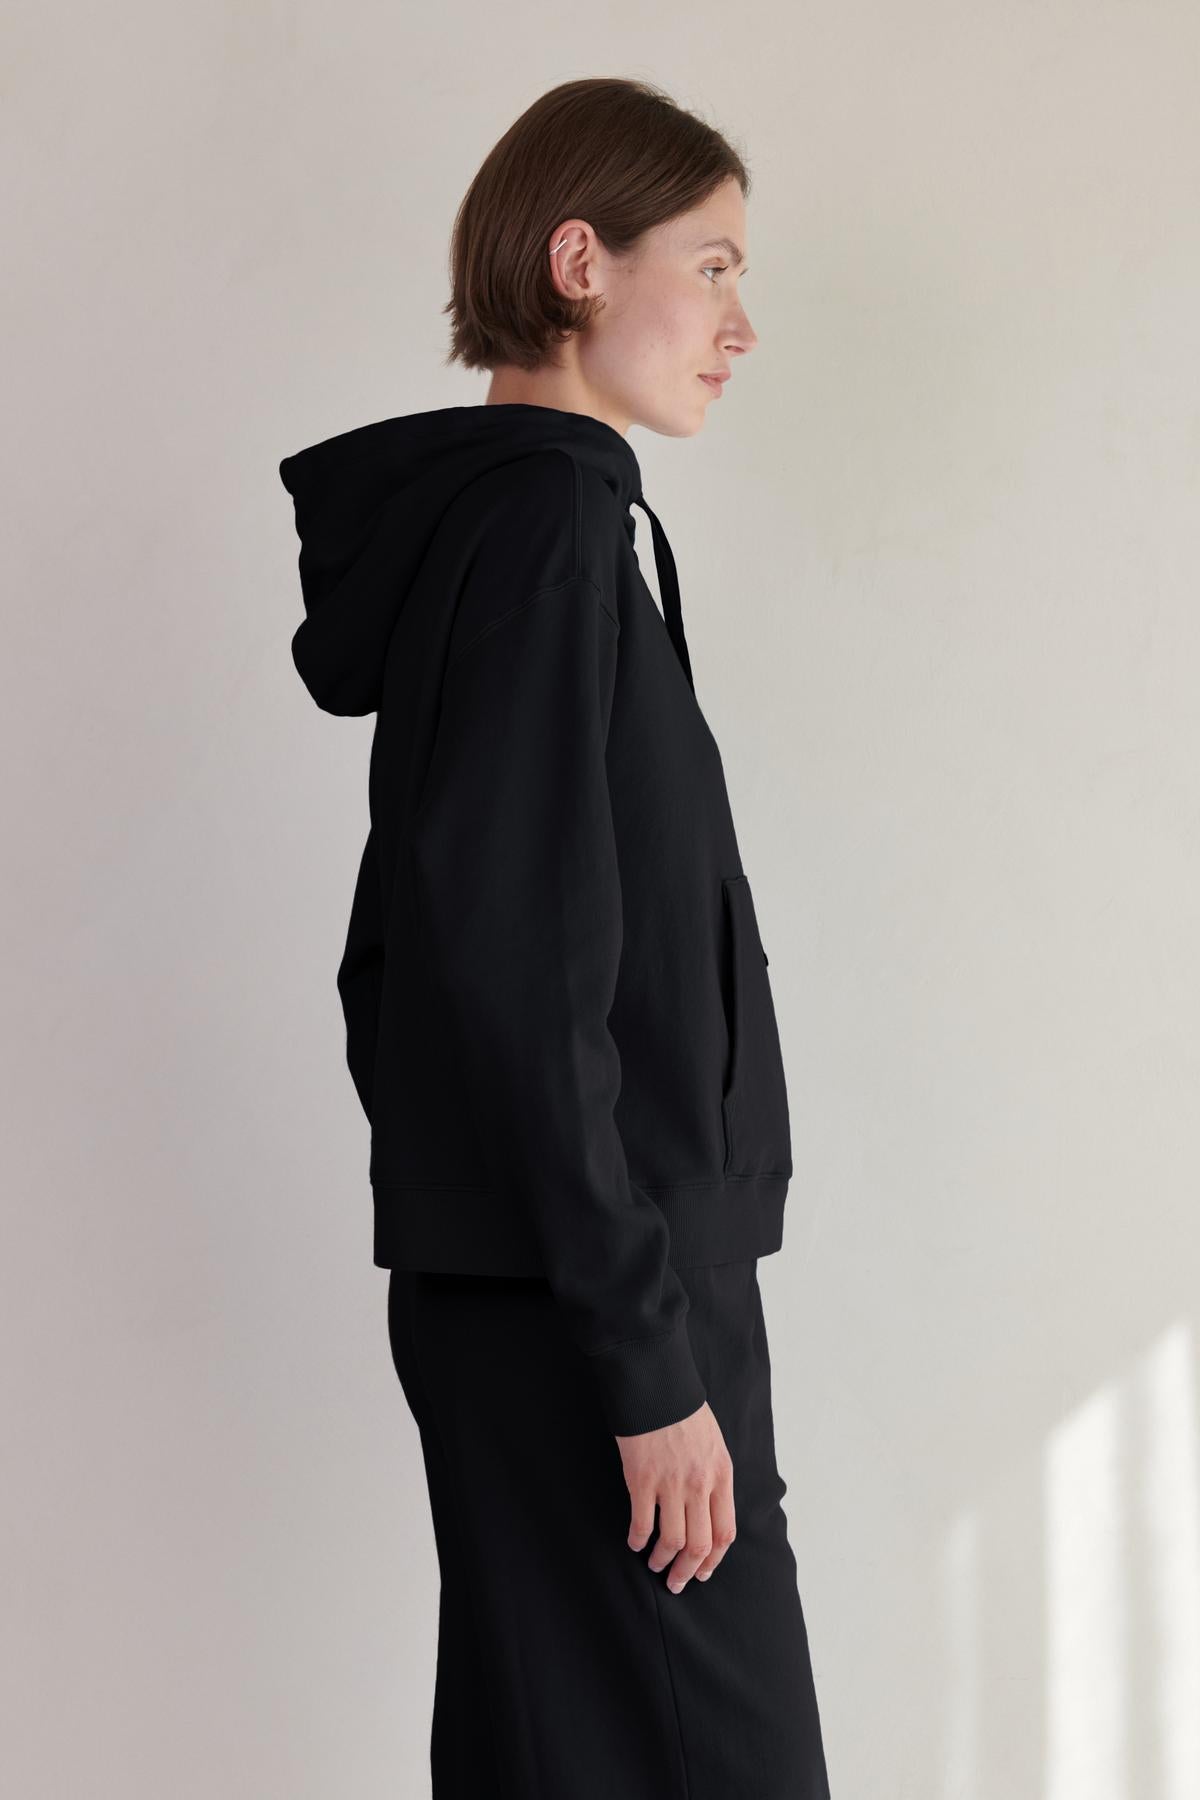 A woman wearing a black OJAI HOODIE and trousers by Velvet by Jenny Graham.-26861801898177